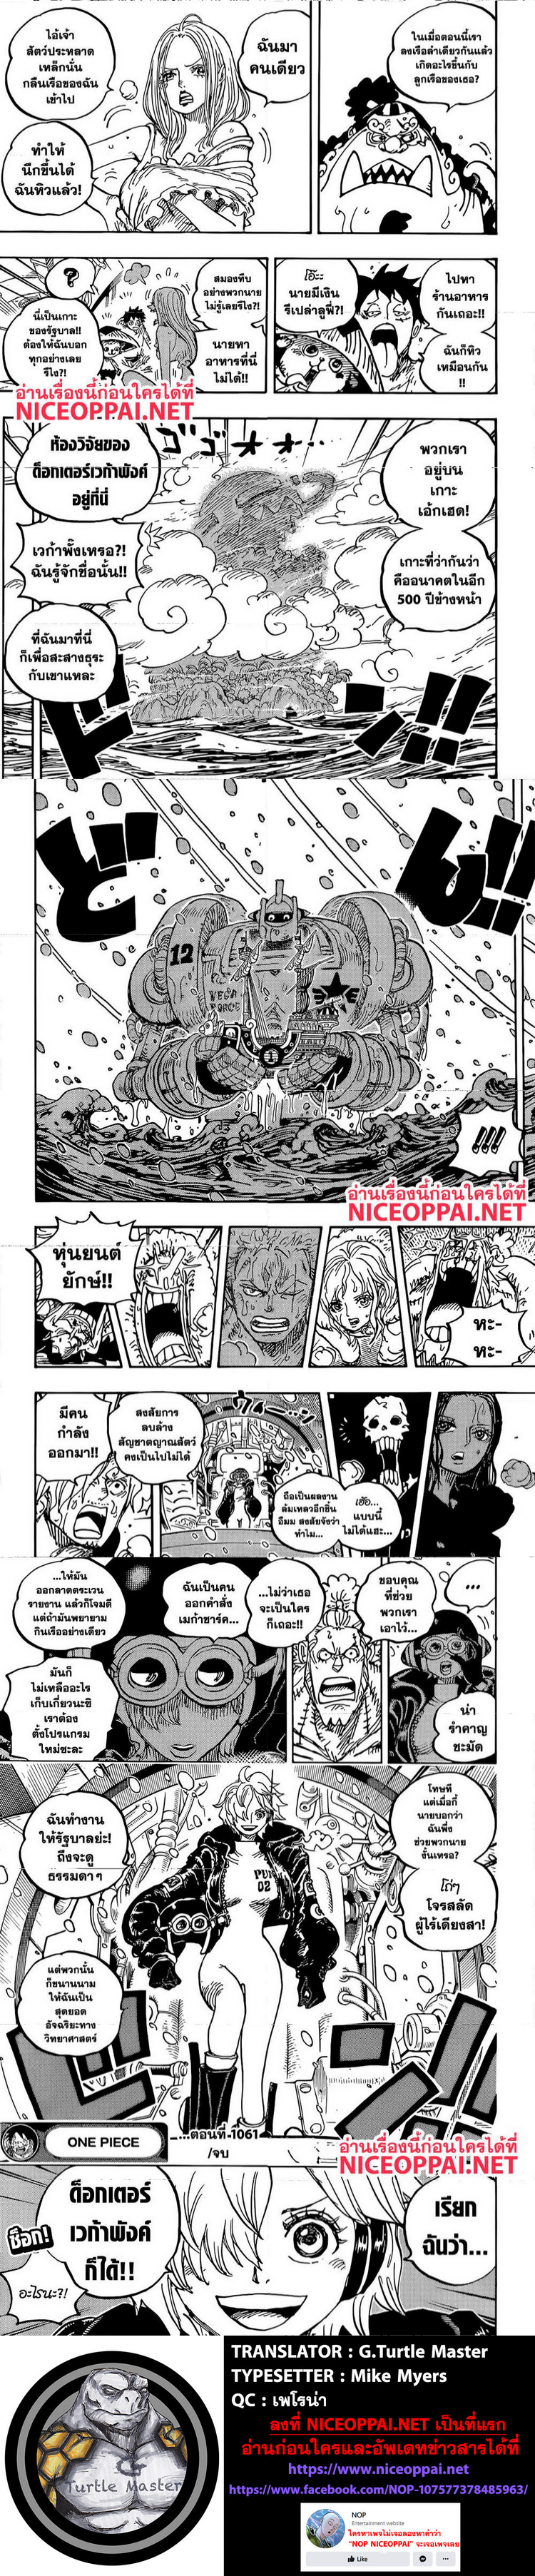 One-Piece-1061-3.png